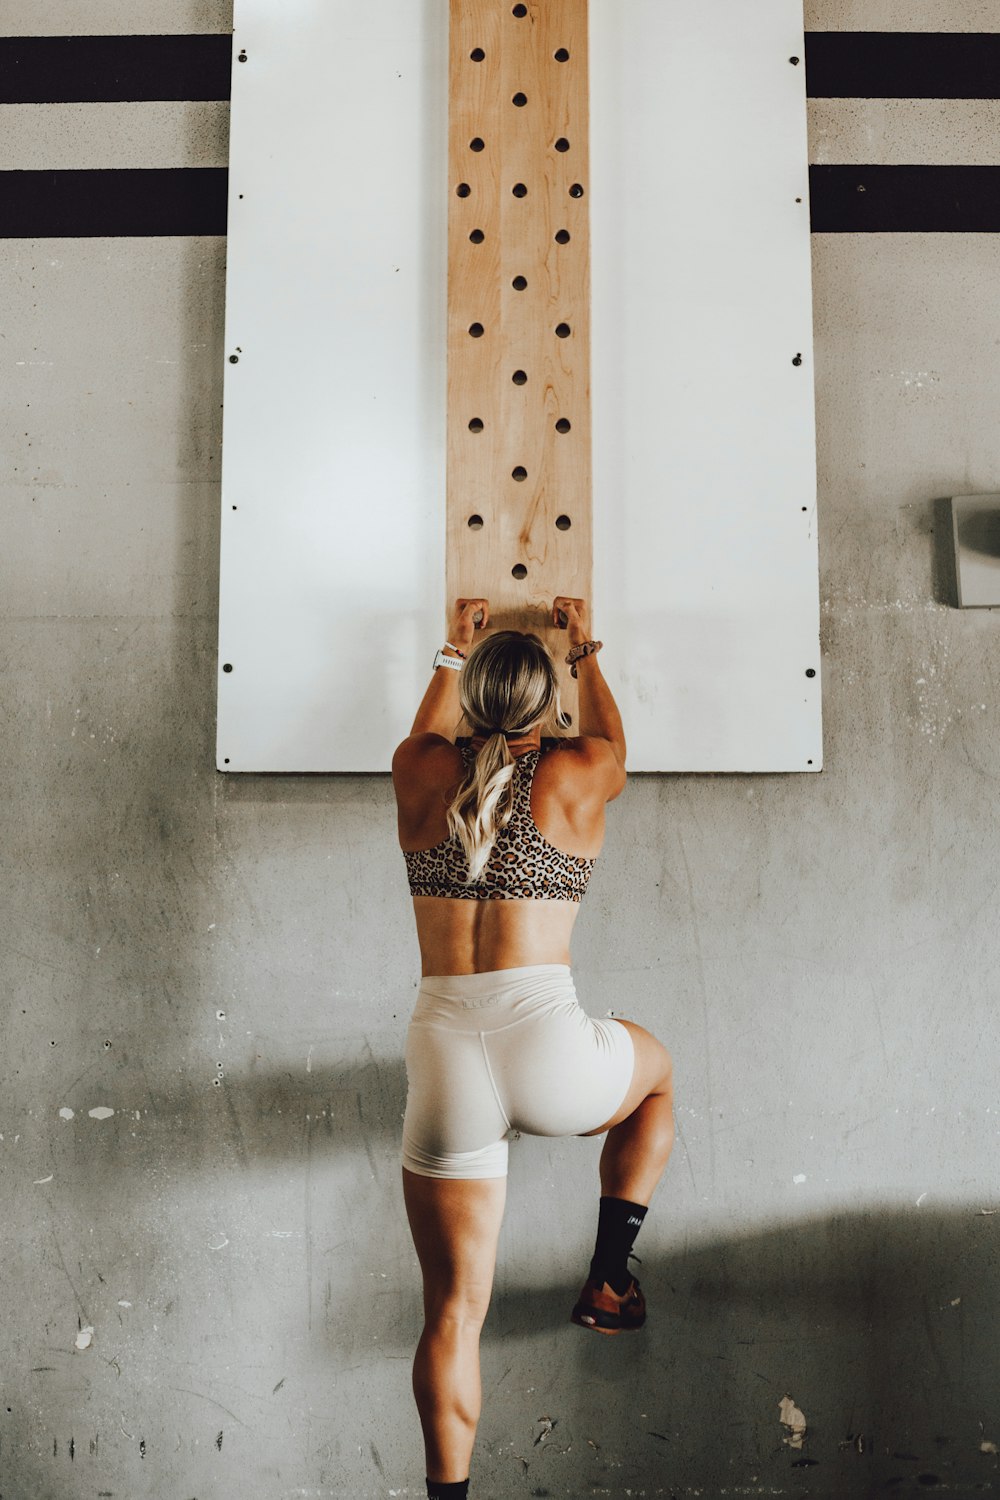 100+ Fitness Images | Download Free Pictures on Unsplash